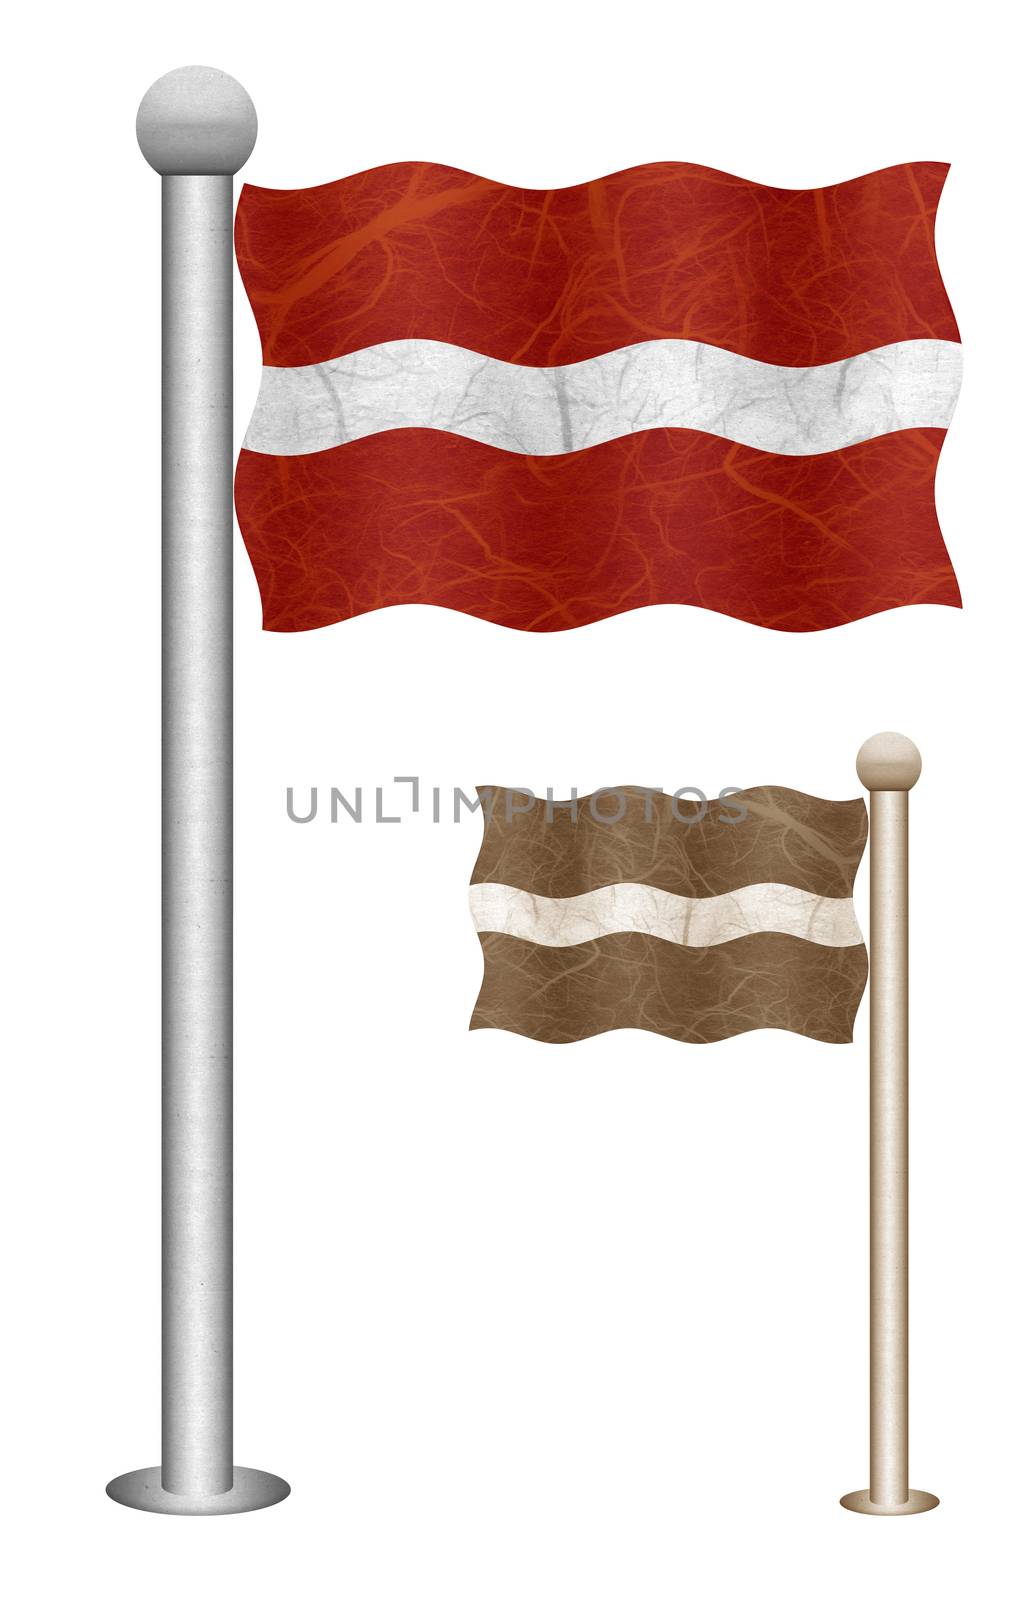 Latvia flag waving on the wind. Flags of countries in Europe. Mulberry paper on white background.